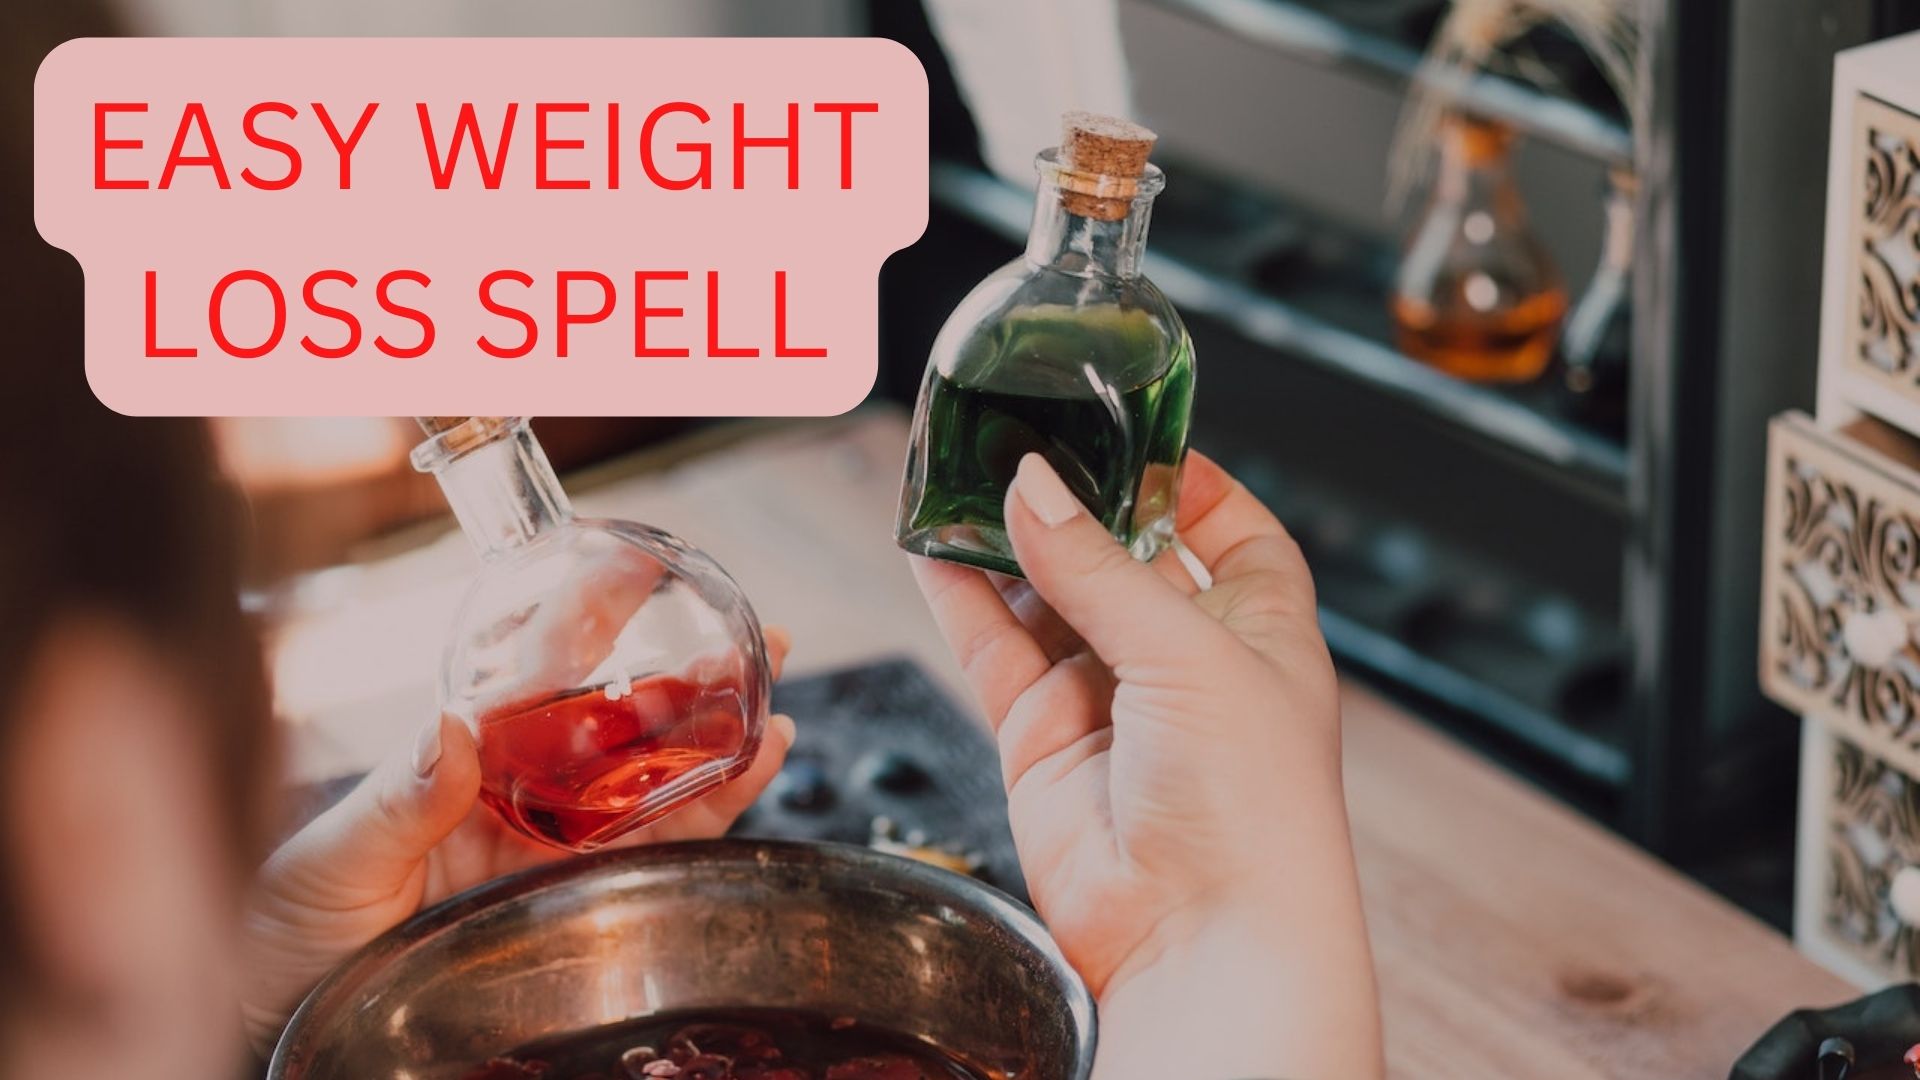 Easy Weight Loss Spell - A Practical Way To Lose Weight